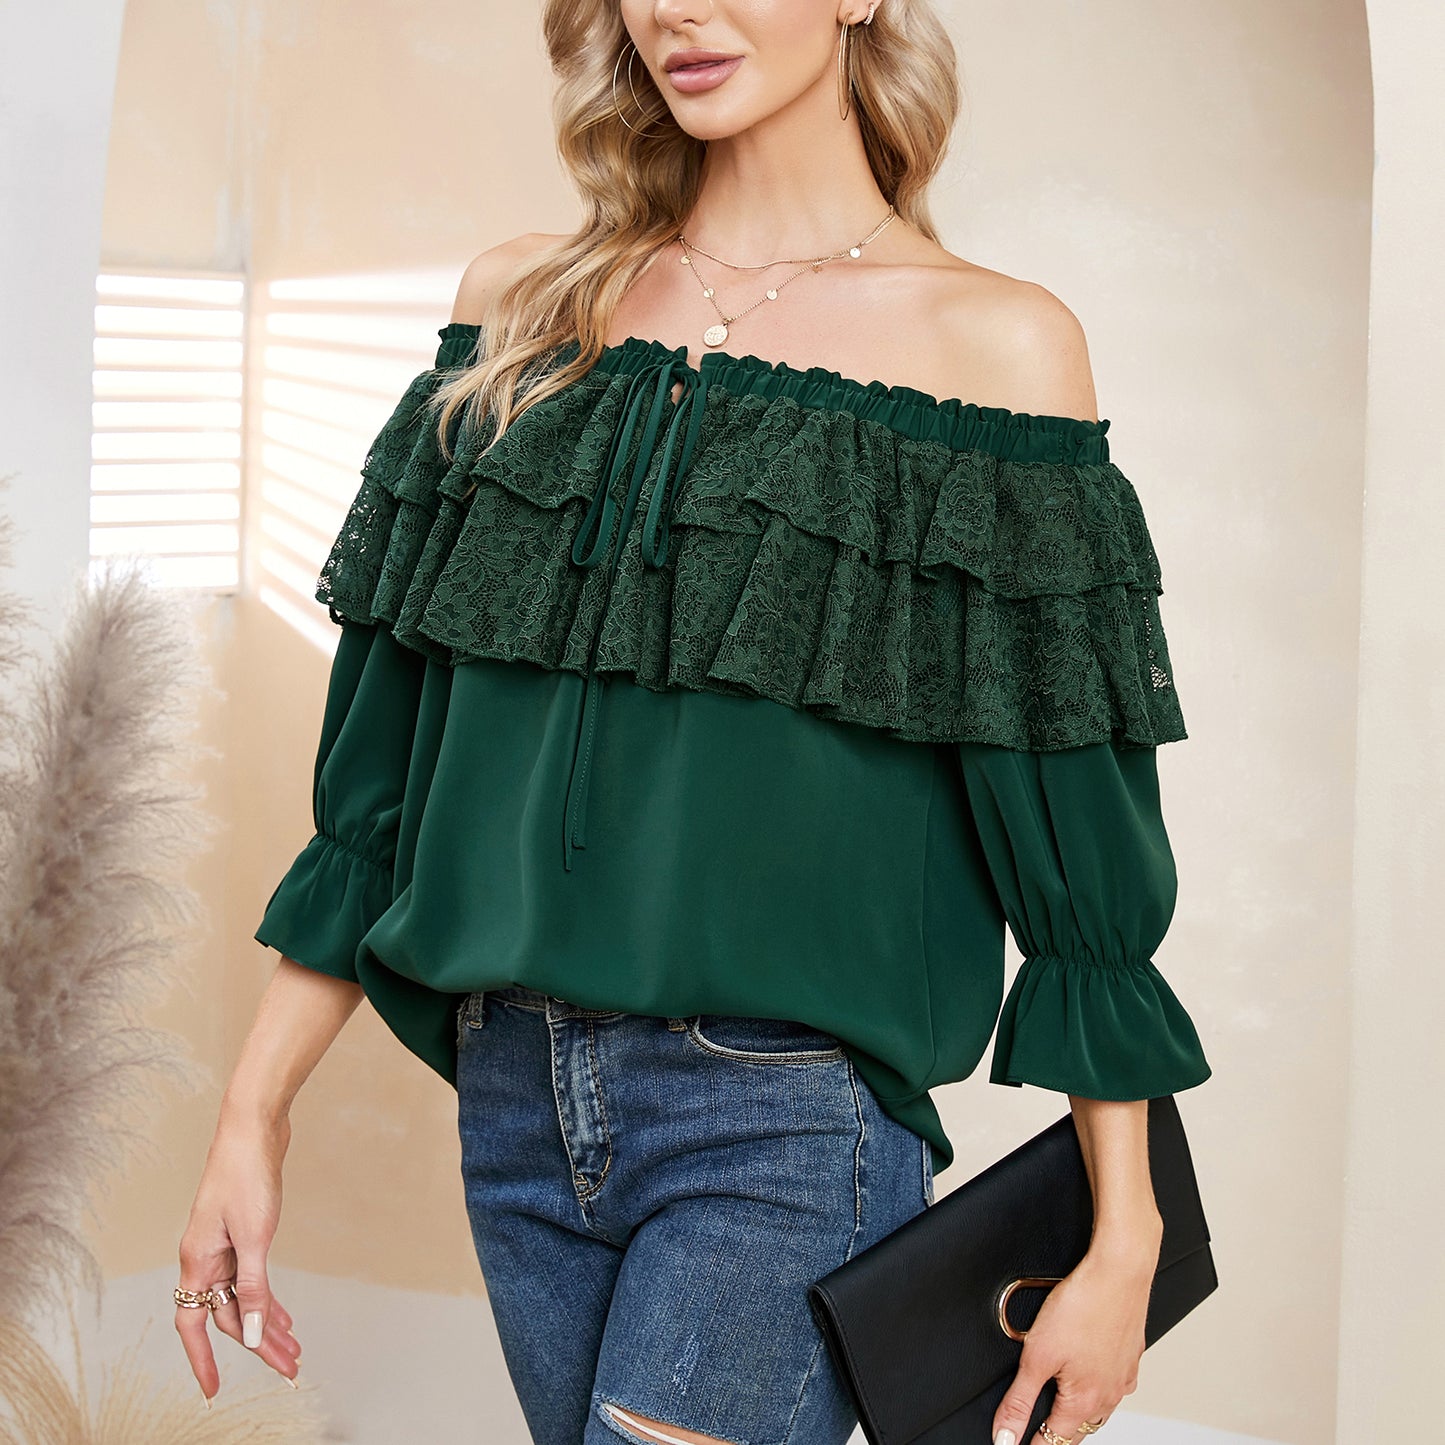 Byinns Women's Off The Shoulder Layered Ruffle Lace Tops Long Puff Sleeve Blouses Flowy Party Dressy Tops